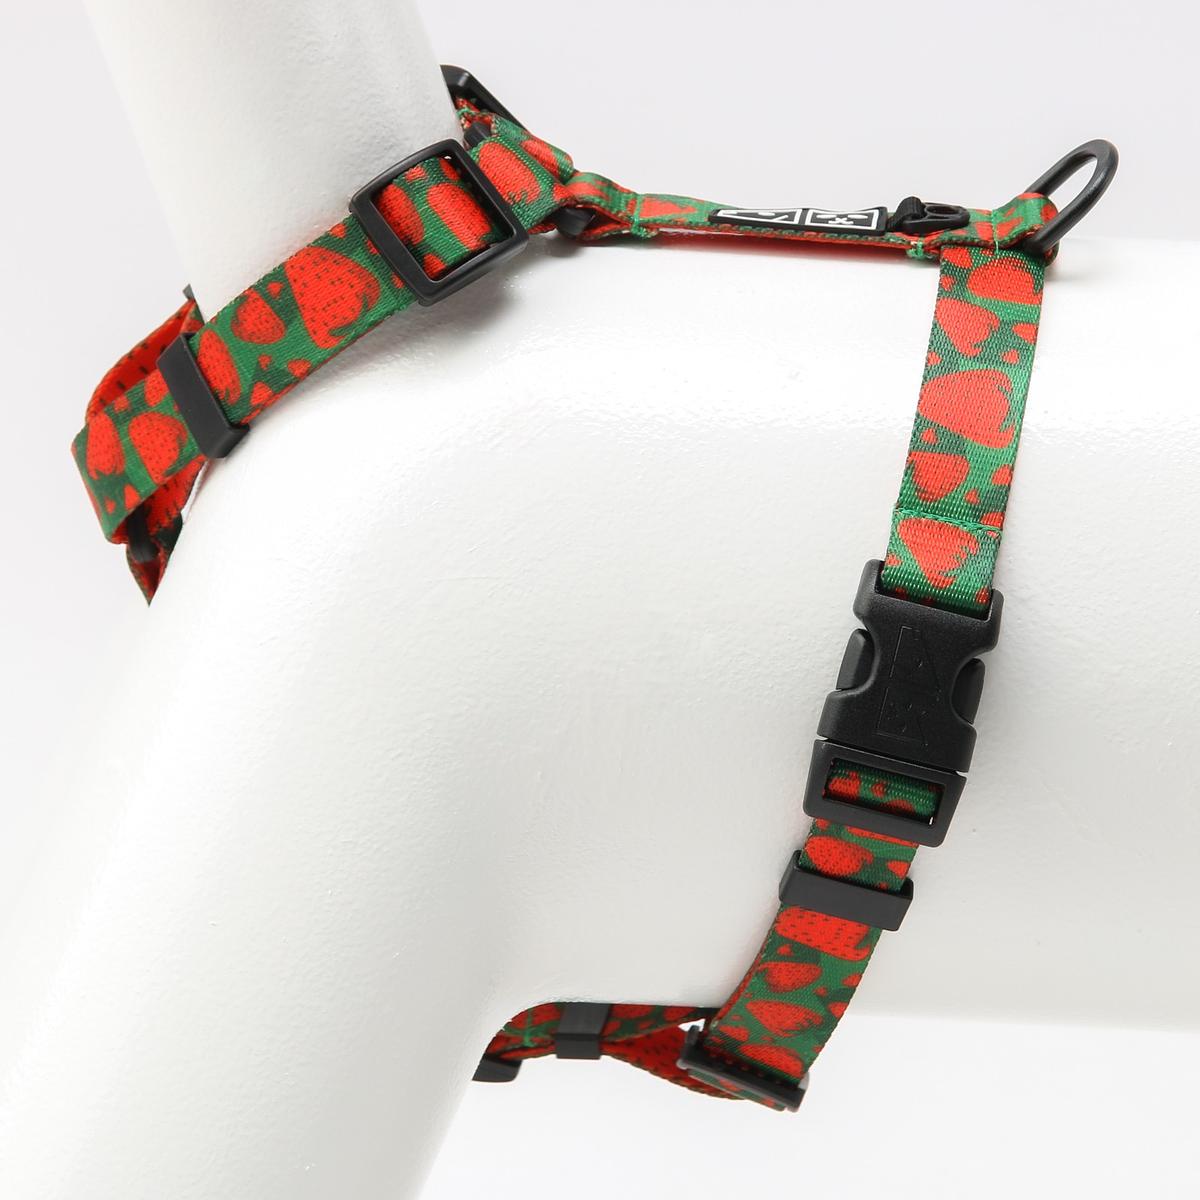 Stay-on guard harness "Strawberry Fields Forever"